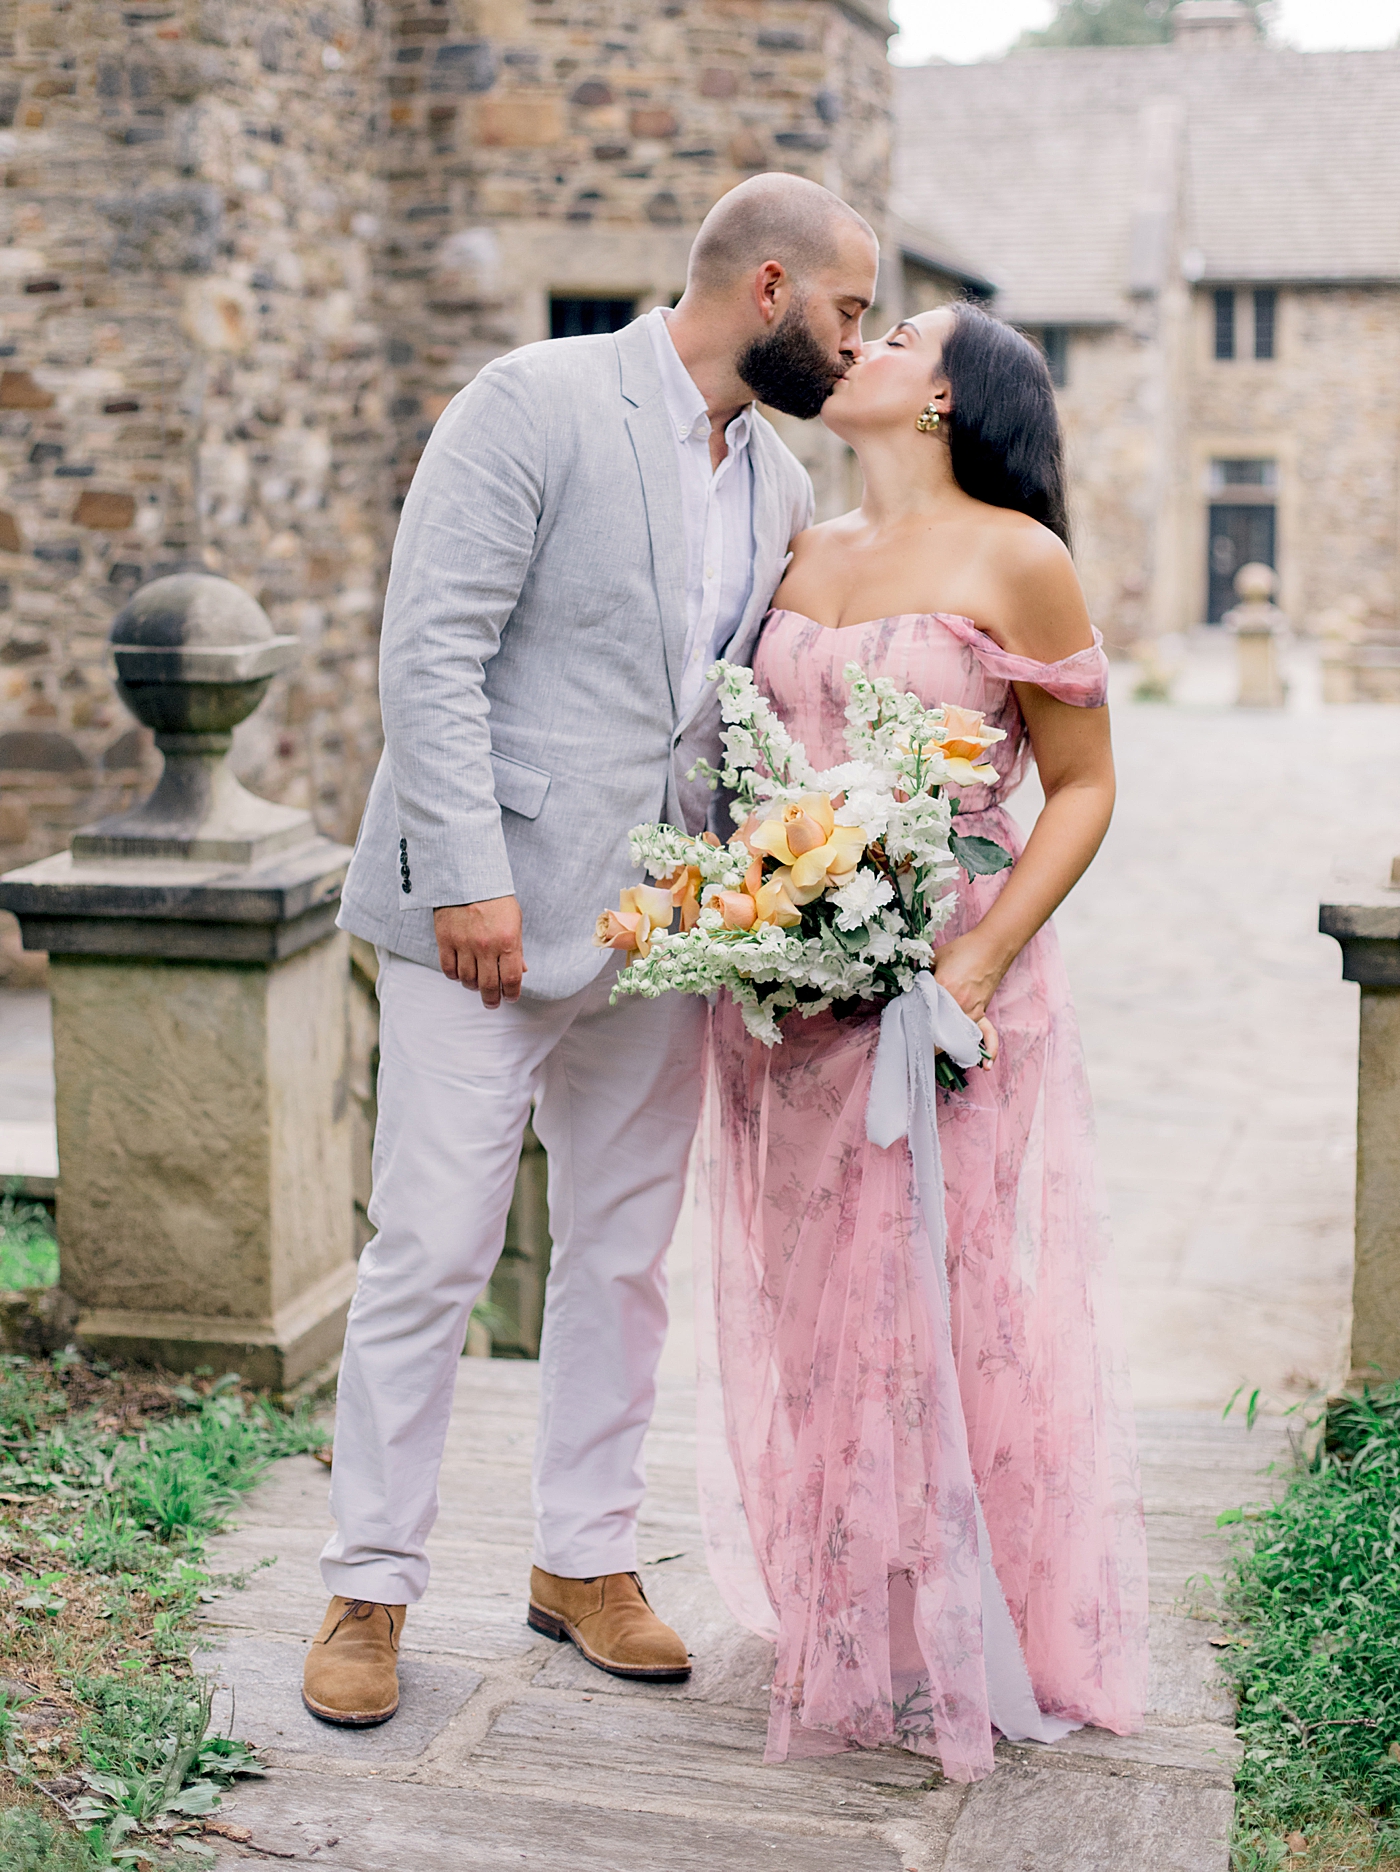 Couple in pink and gray kissing | Styling and Planning Engagement Sessions with Hope Helmuth Photography